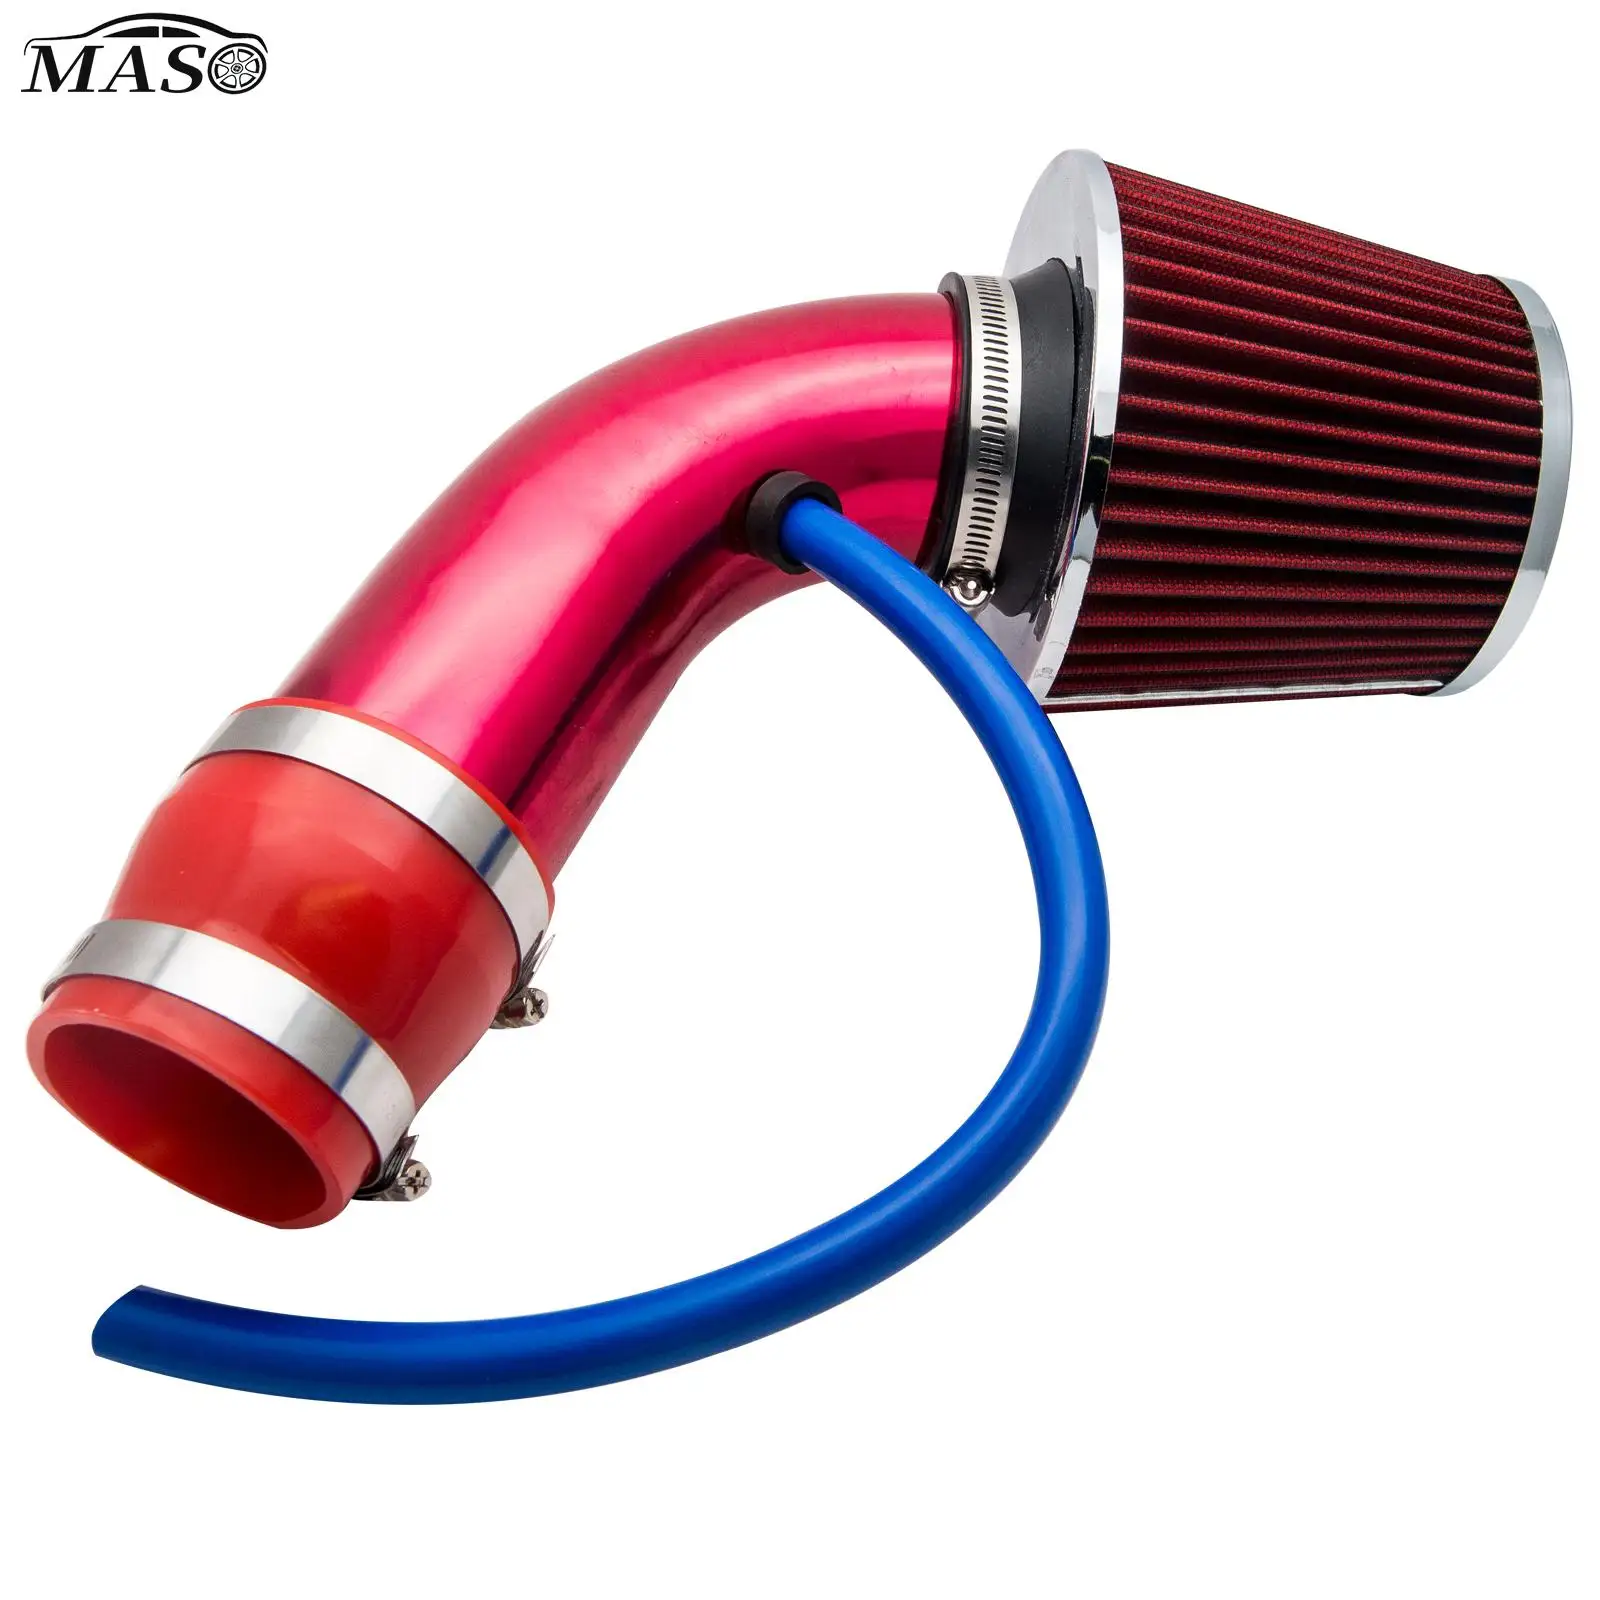 Купи Steel Cold Air Intake Hose With A 1x45 Degree Carbon Fiber Look +1 X Intake Air Filter Red Pipe + Red Filter за 1,655 рублей в магазине AliExpress